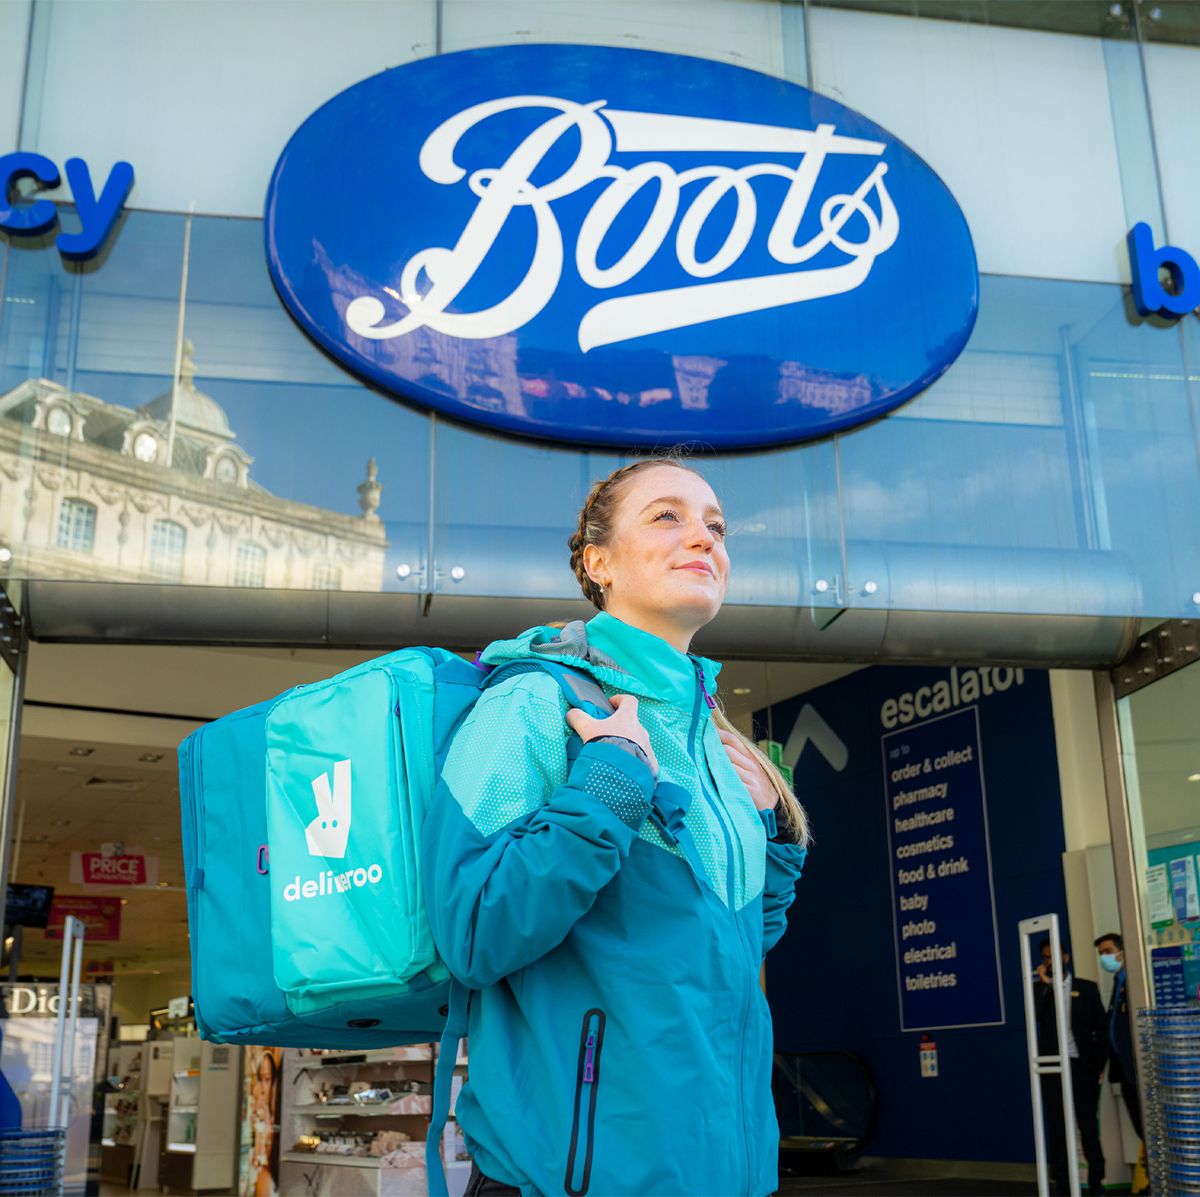 boots launch on deliveroo